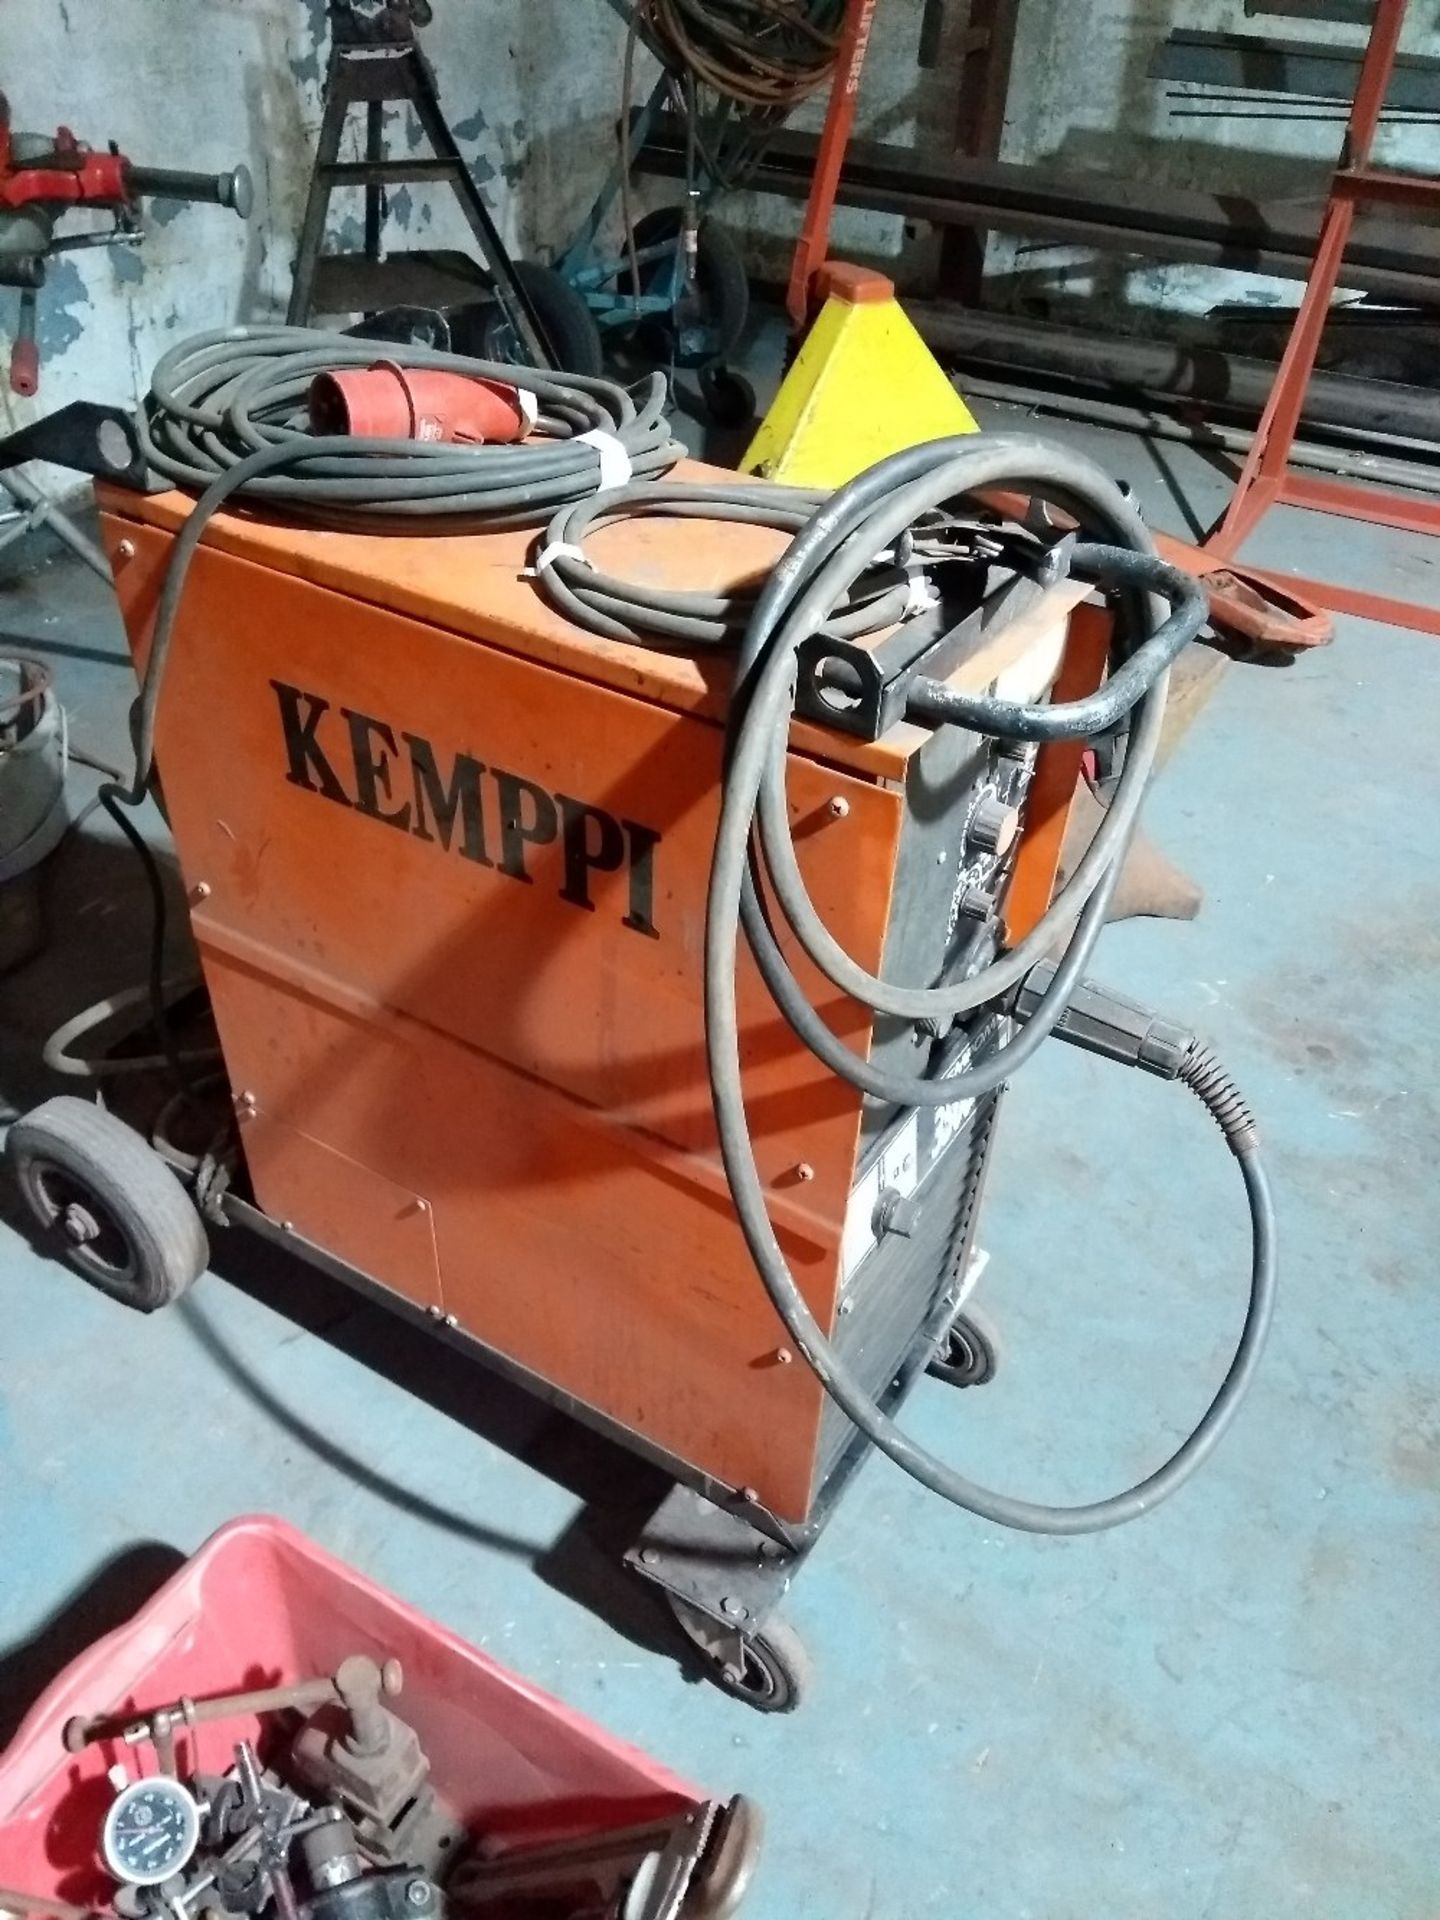 Kemppi 3500S kempomig welder 3phase - 6228354/600009. Electrical Safety Test Passed (2.8.19). - Image 3 of 3